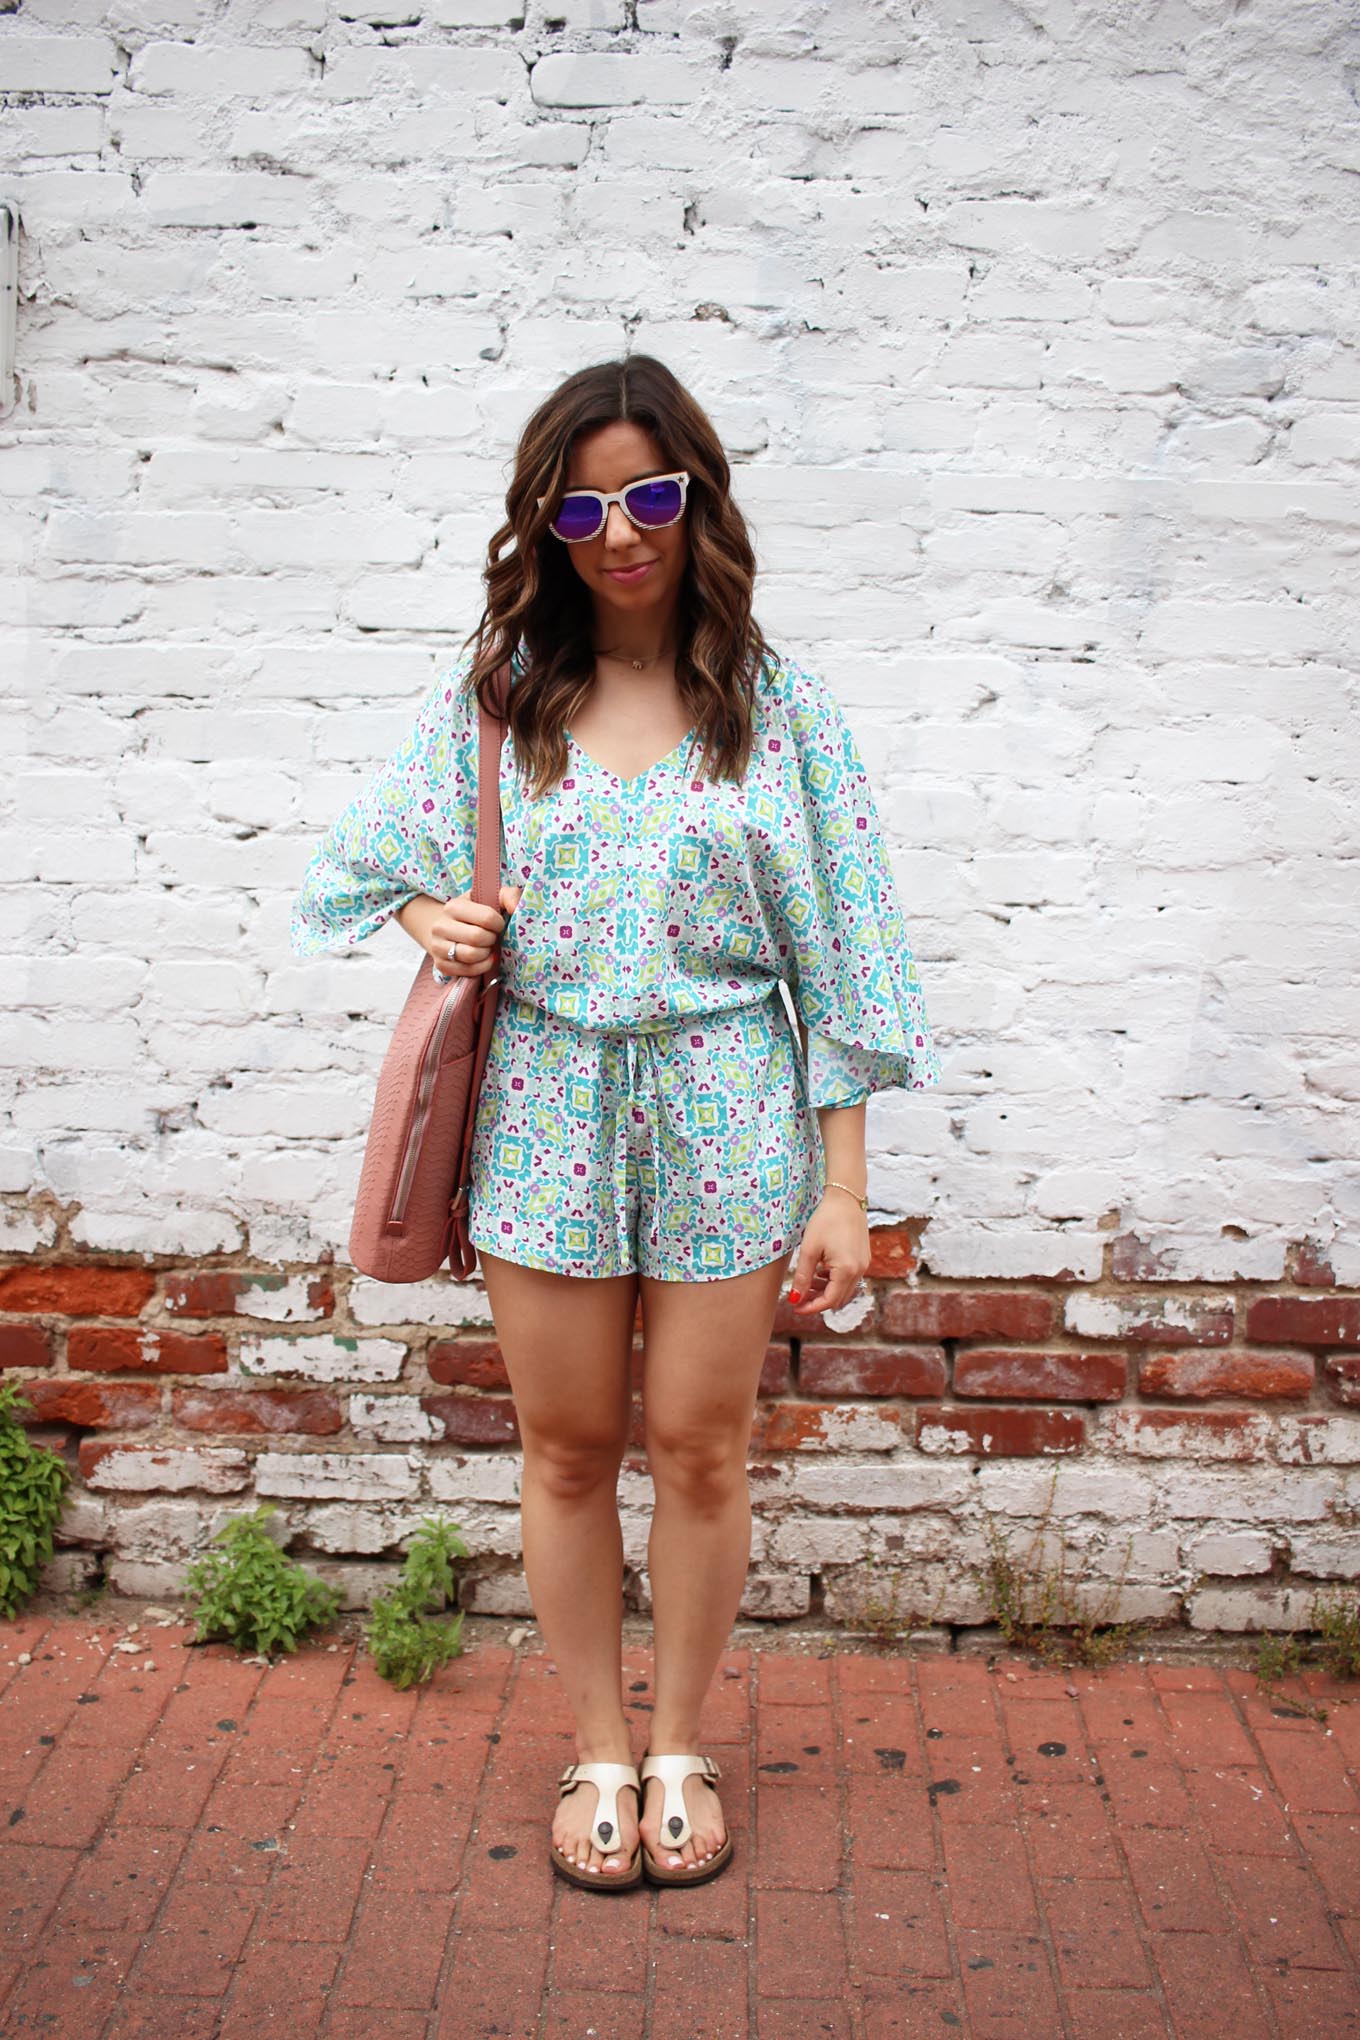 Lifestyle blogger Roxanne of Glass of Glam wearing a Cuddy Studios Romper, Winkwood Sunglasses, and a Mel Boteri bag